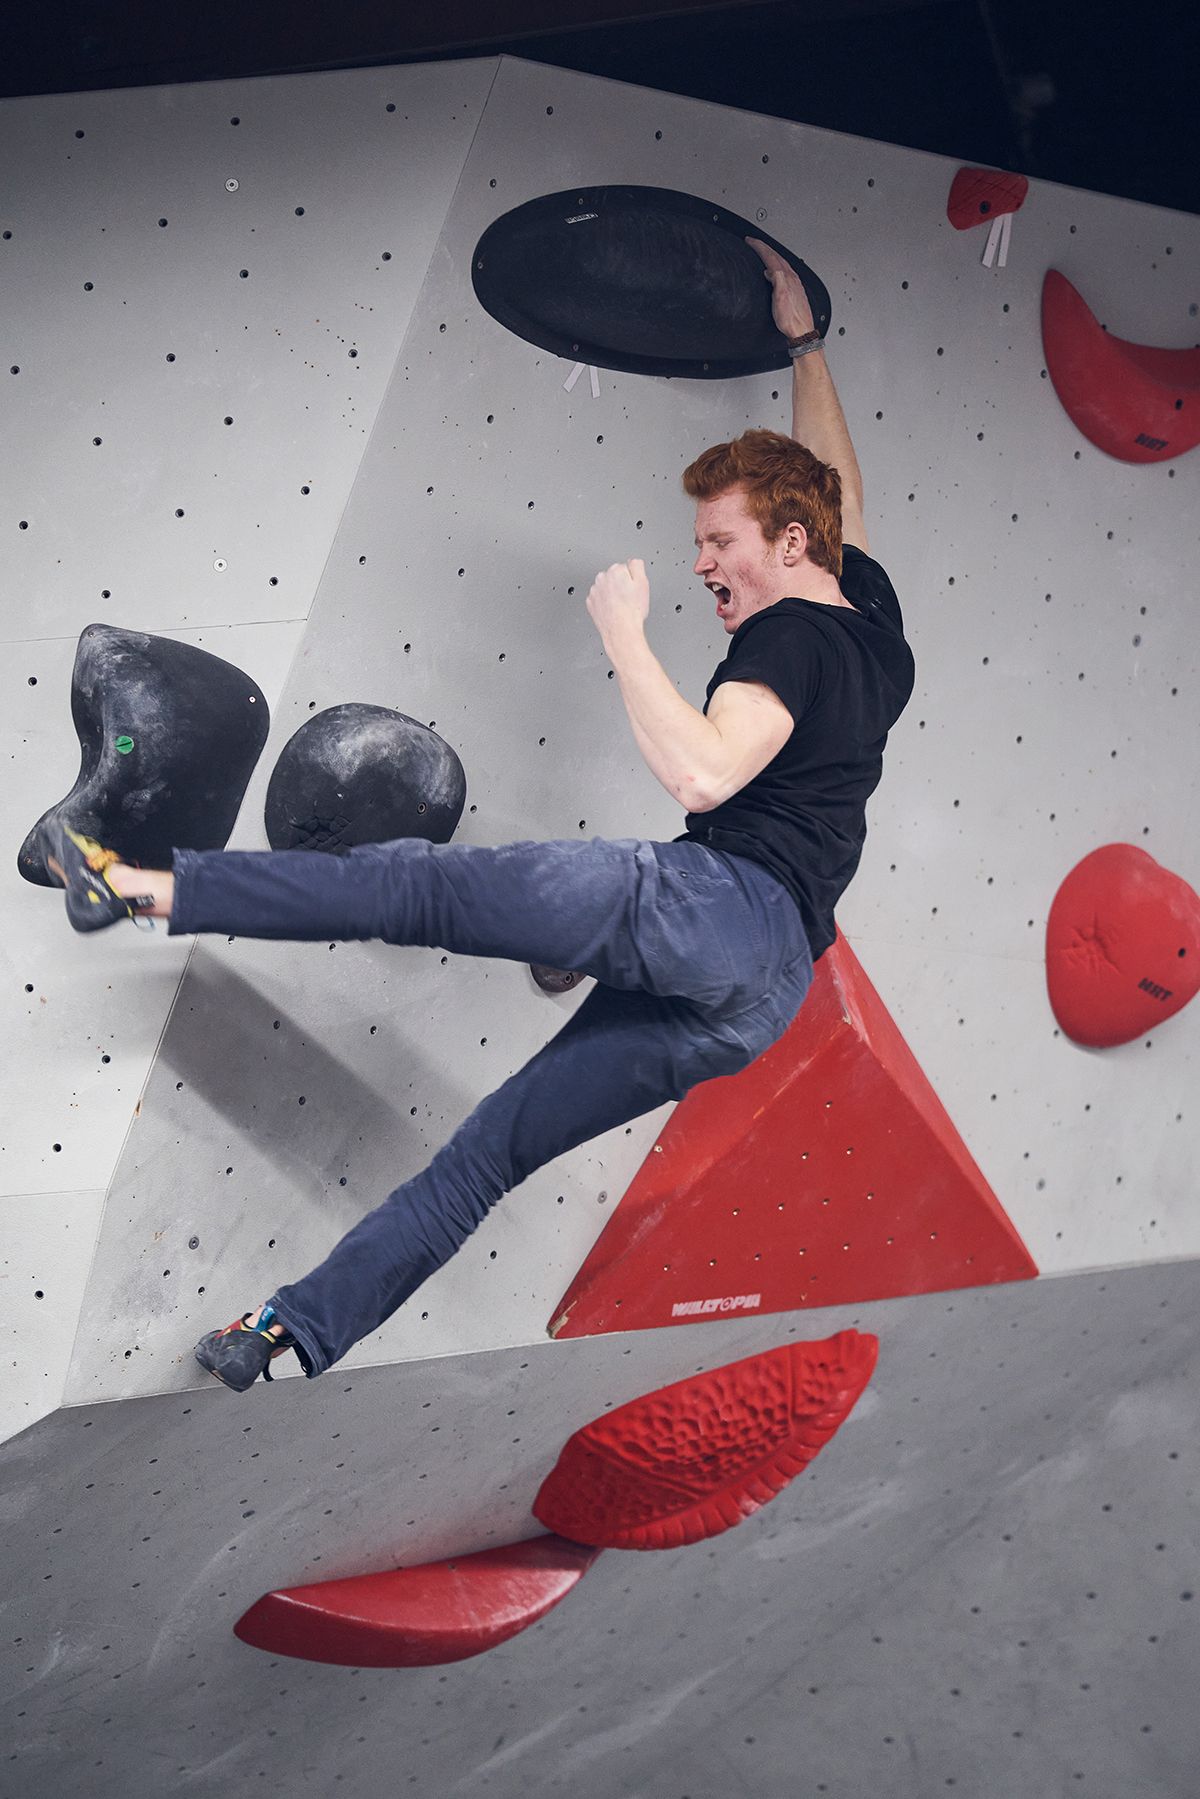 Male bouldering competitor celebrates victory with obligatory fist pump